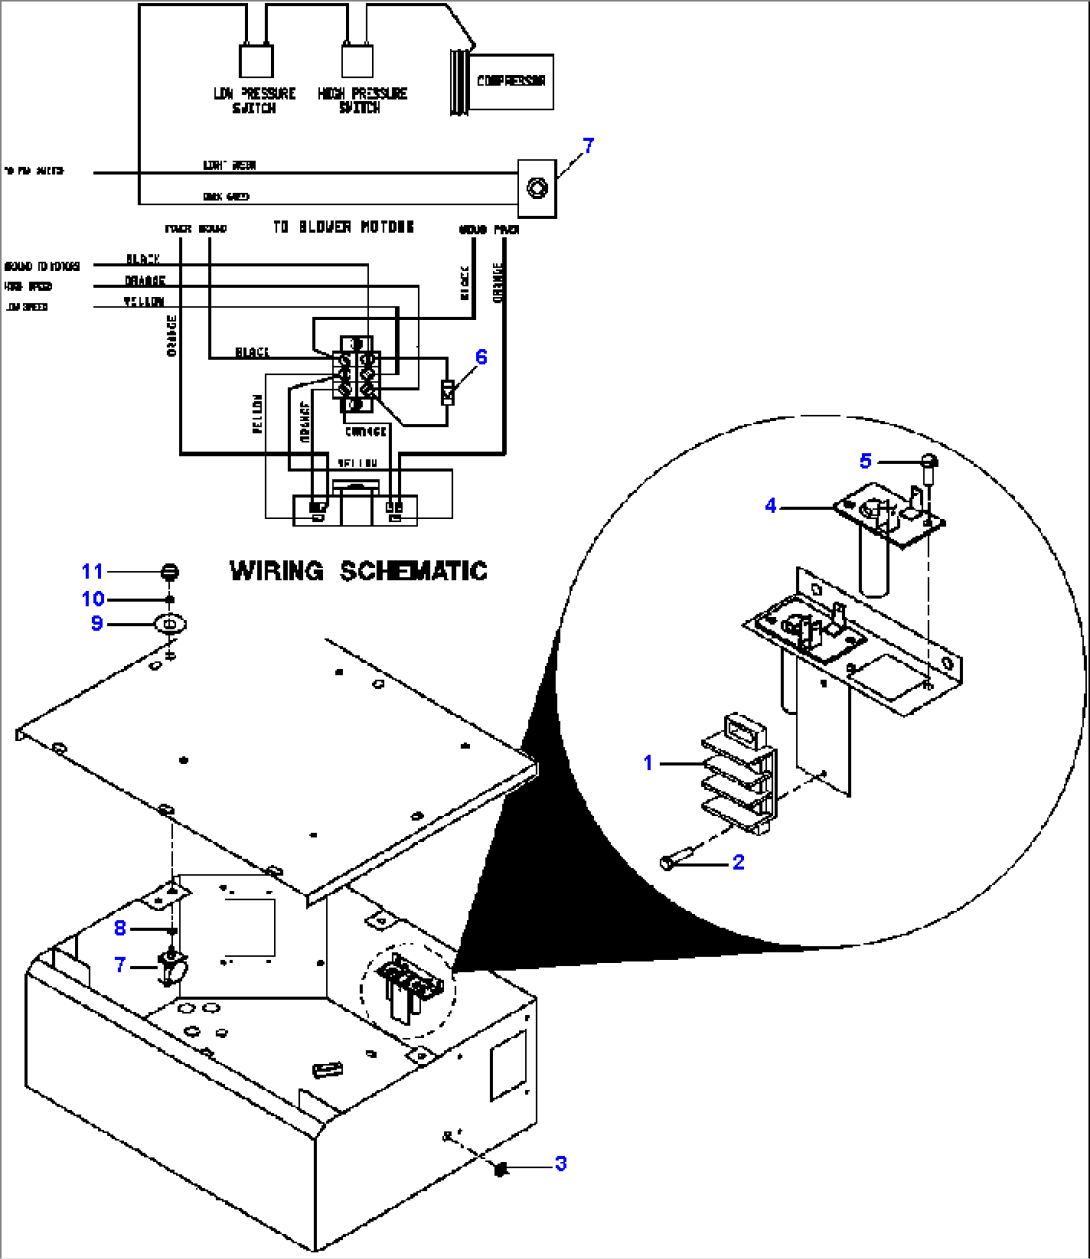 AIR CONDITIONER/HEATER ELECTRICAL WIRING